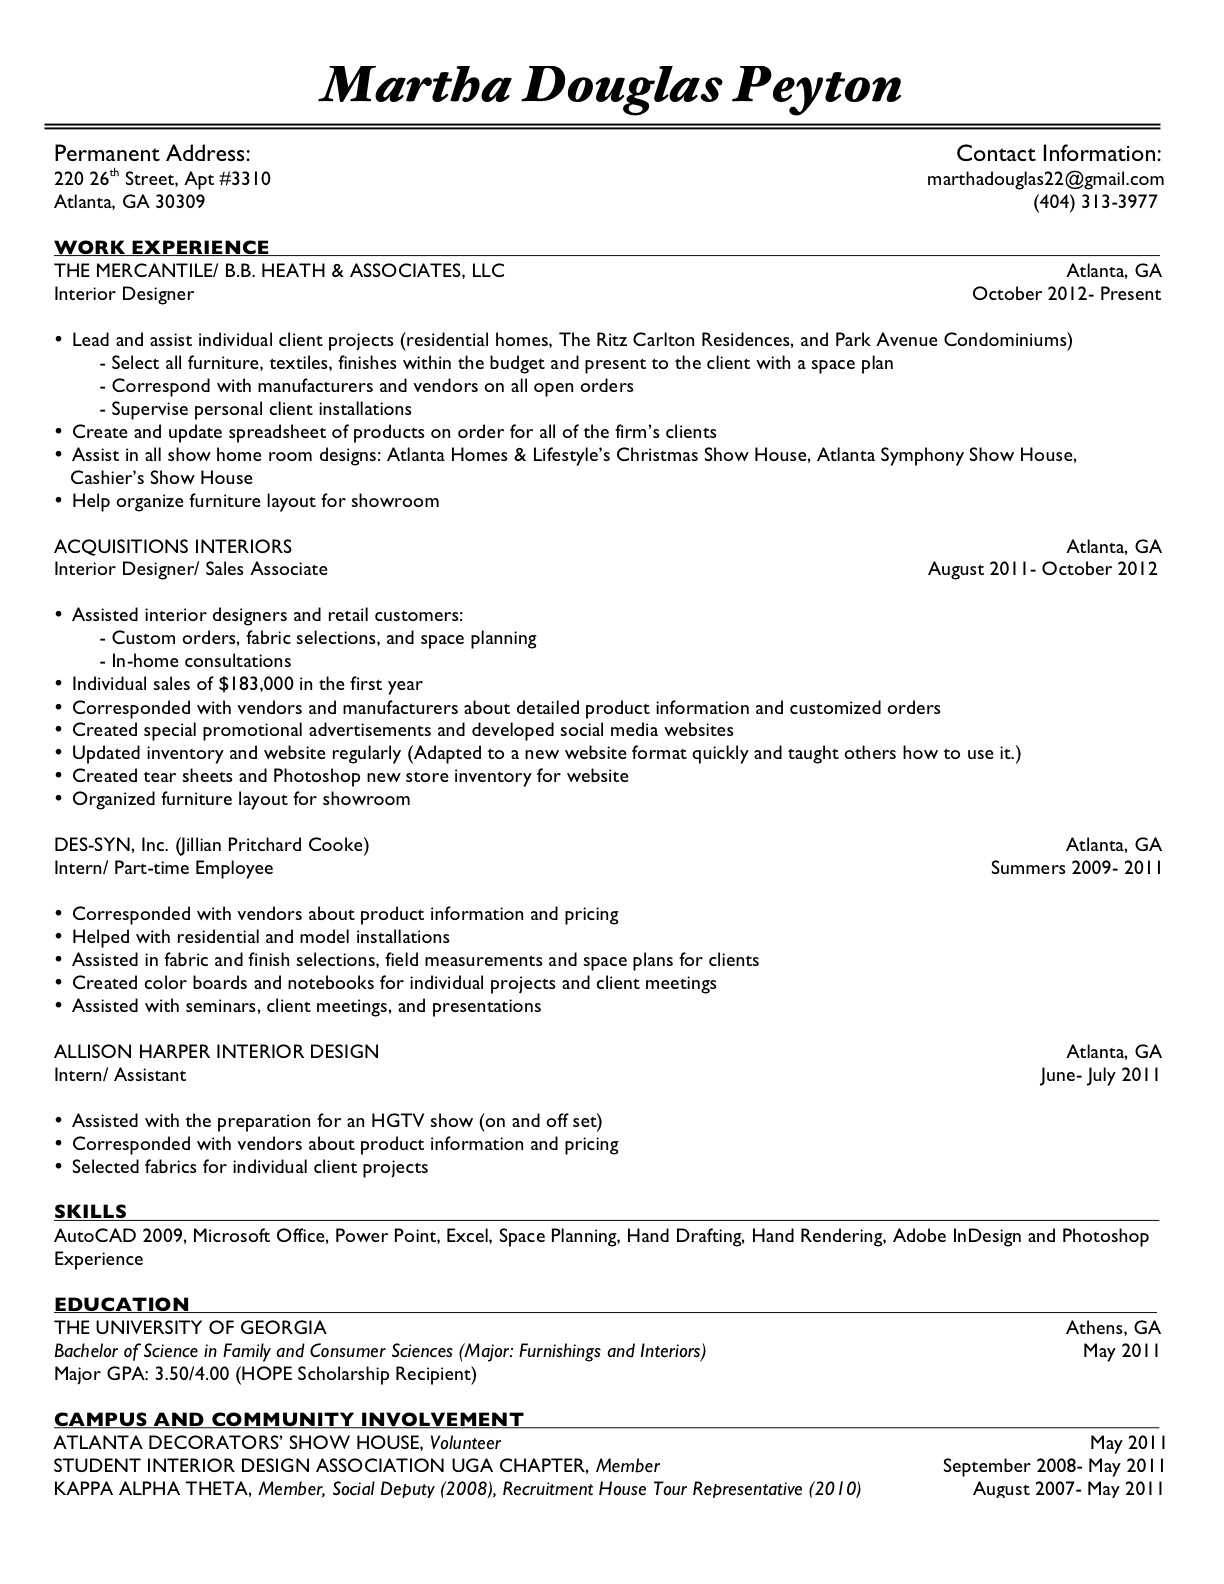 resume reference available upon request